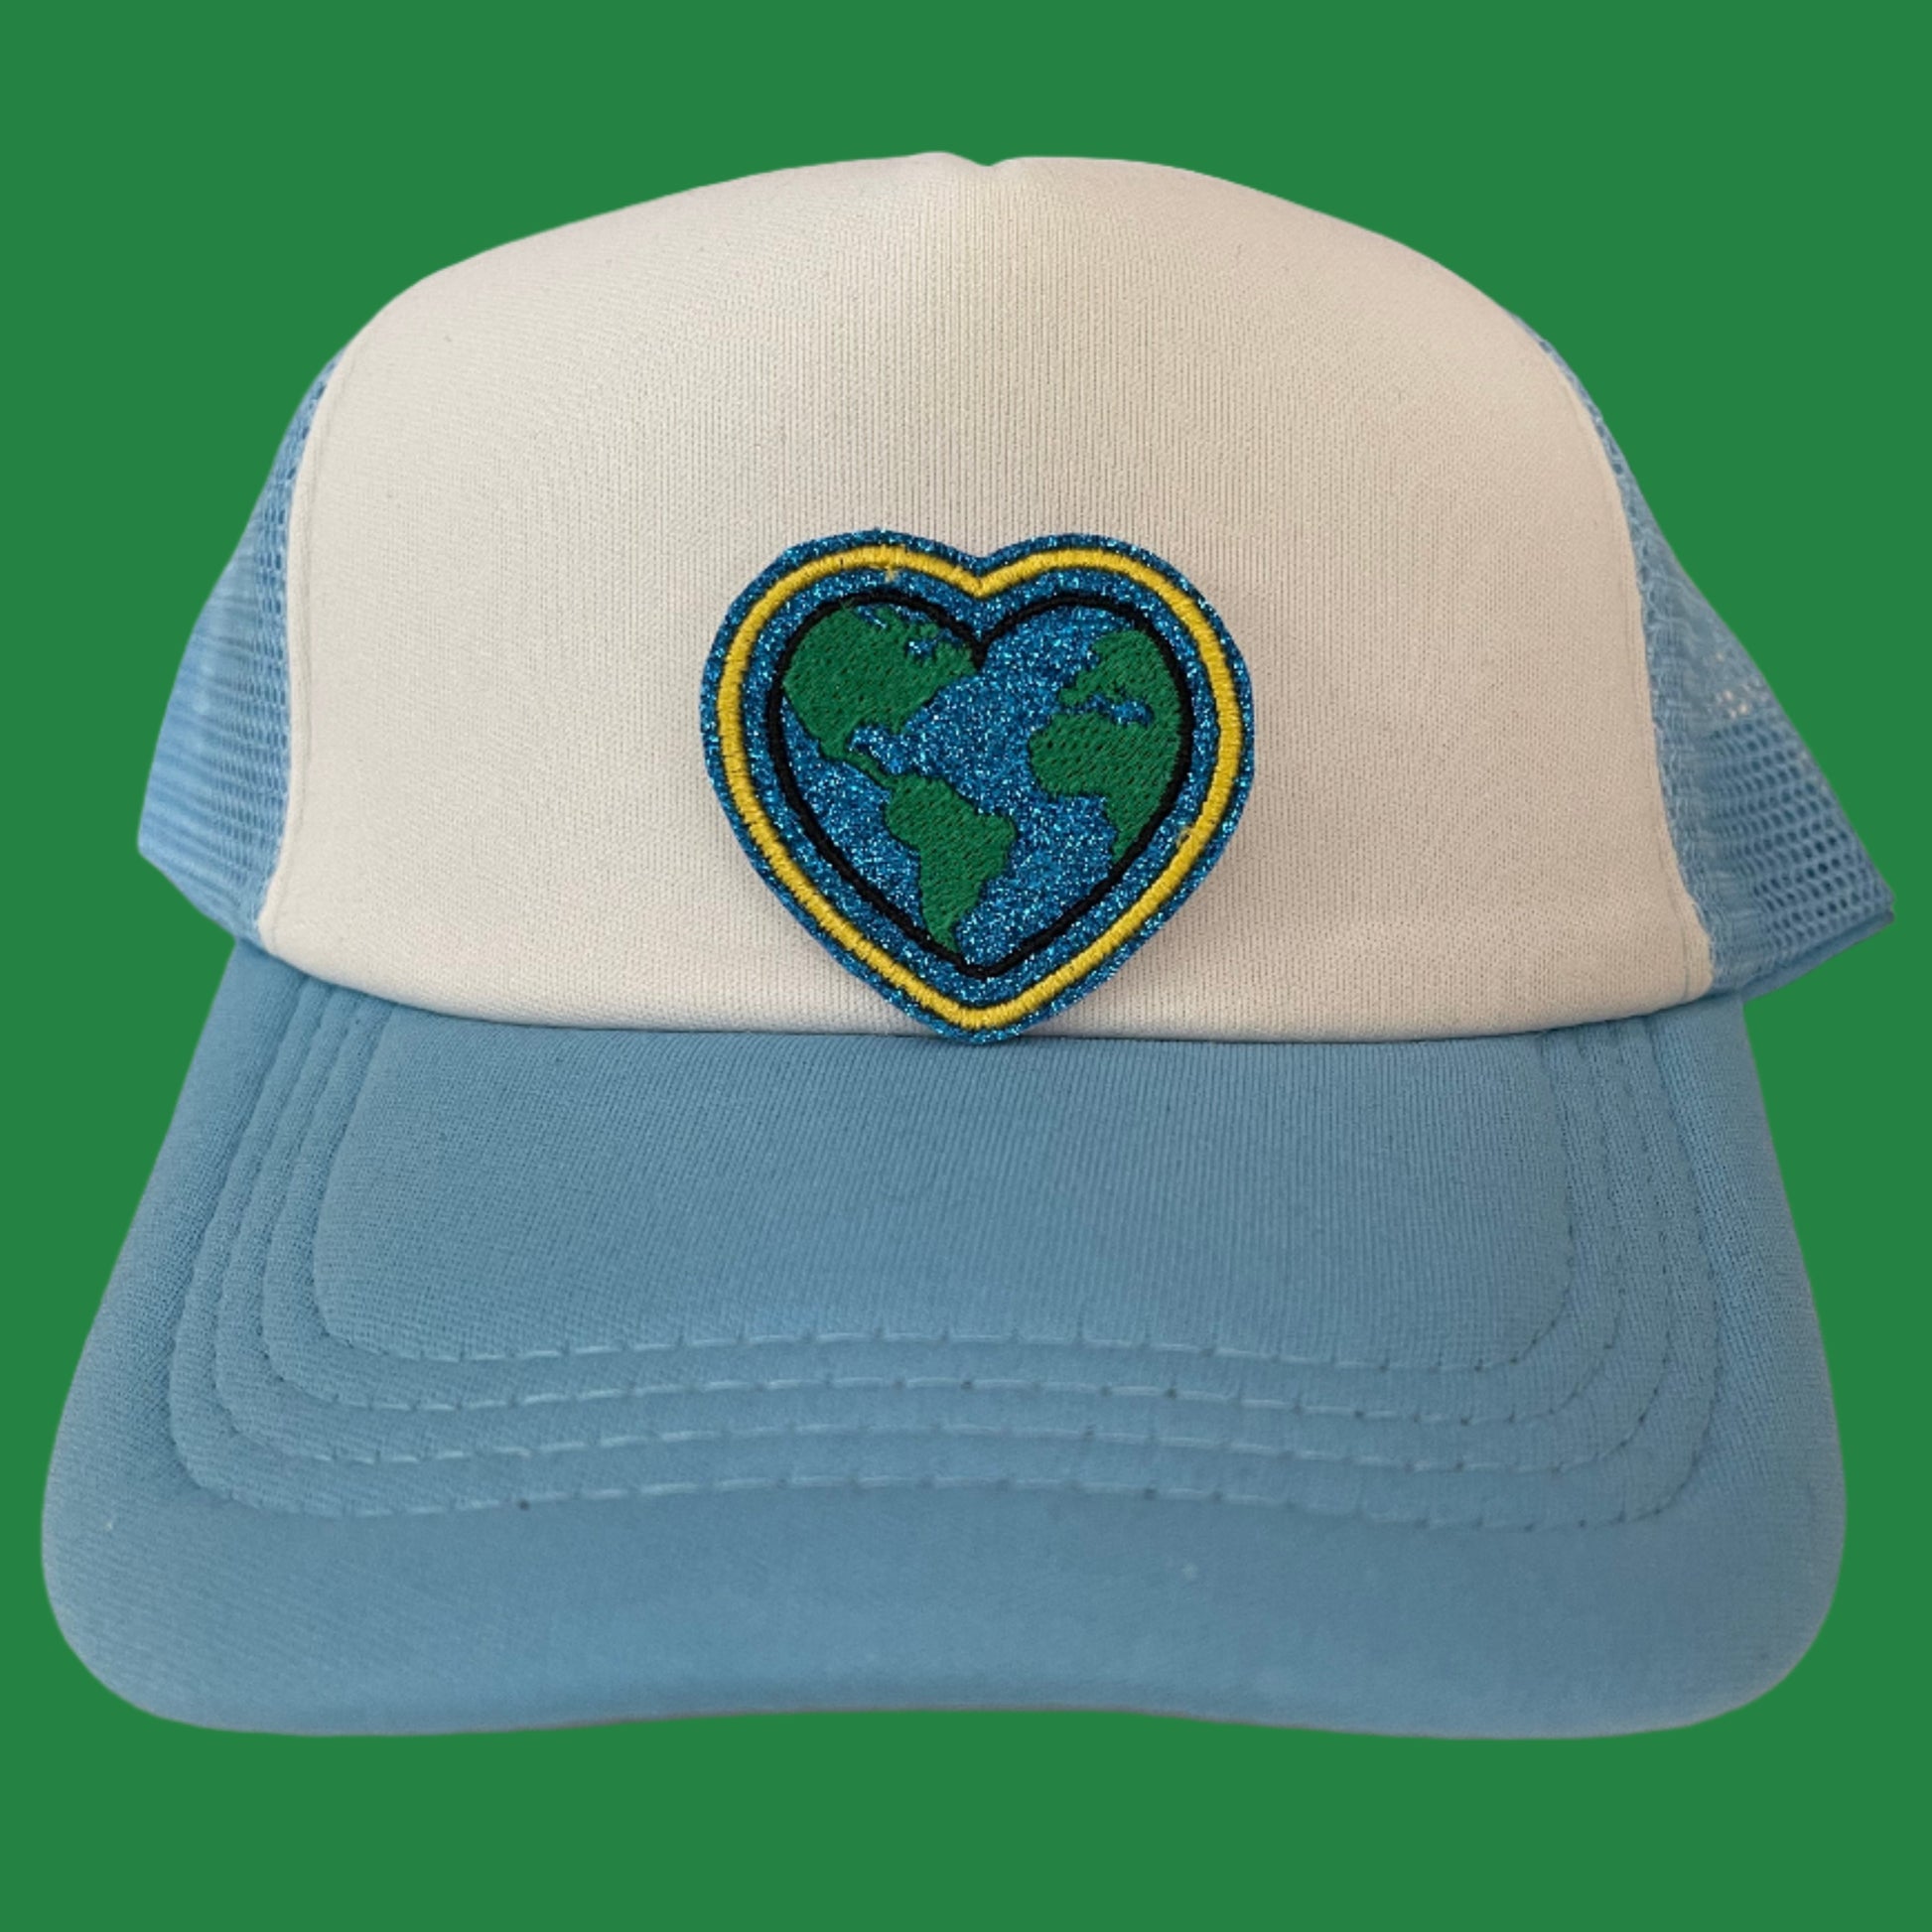 Close-up of a Heart Earth embroidered patch, featuring a heart-shaped Earth design, perfect for customizing hats, apparel, and various accessories.